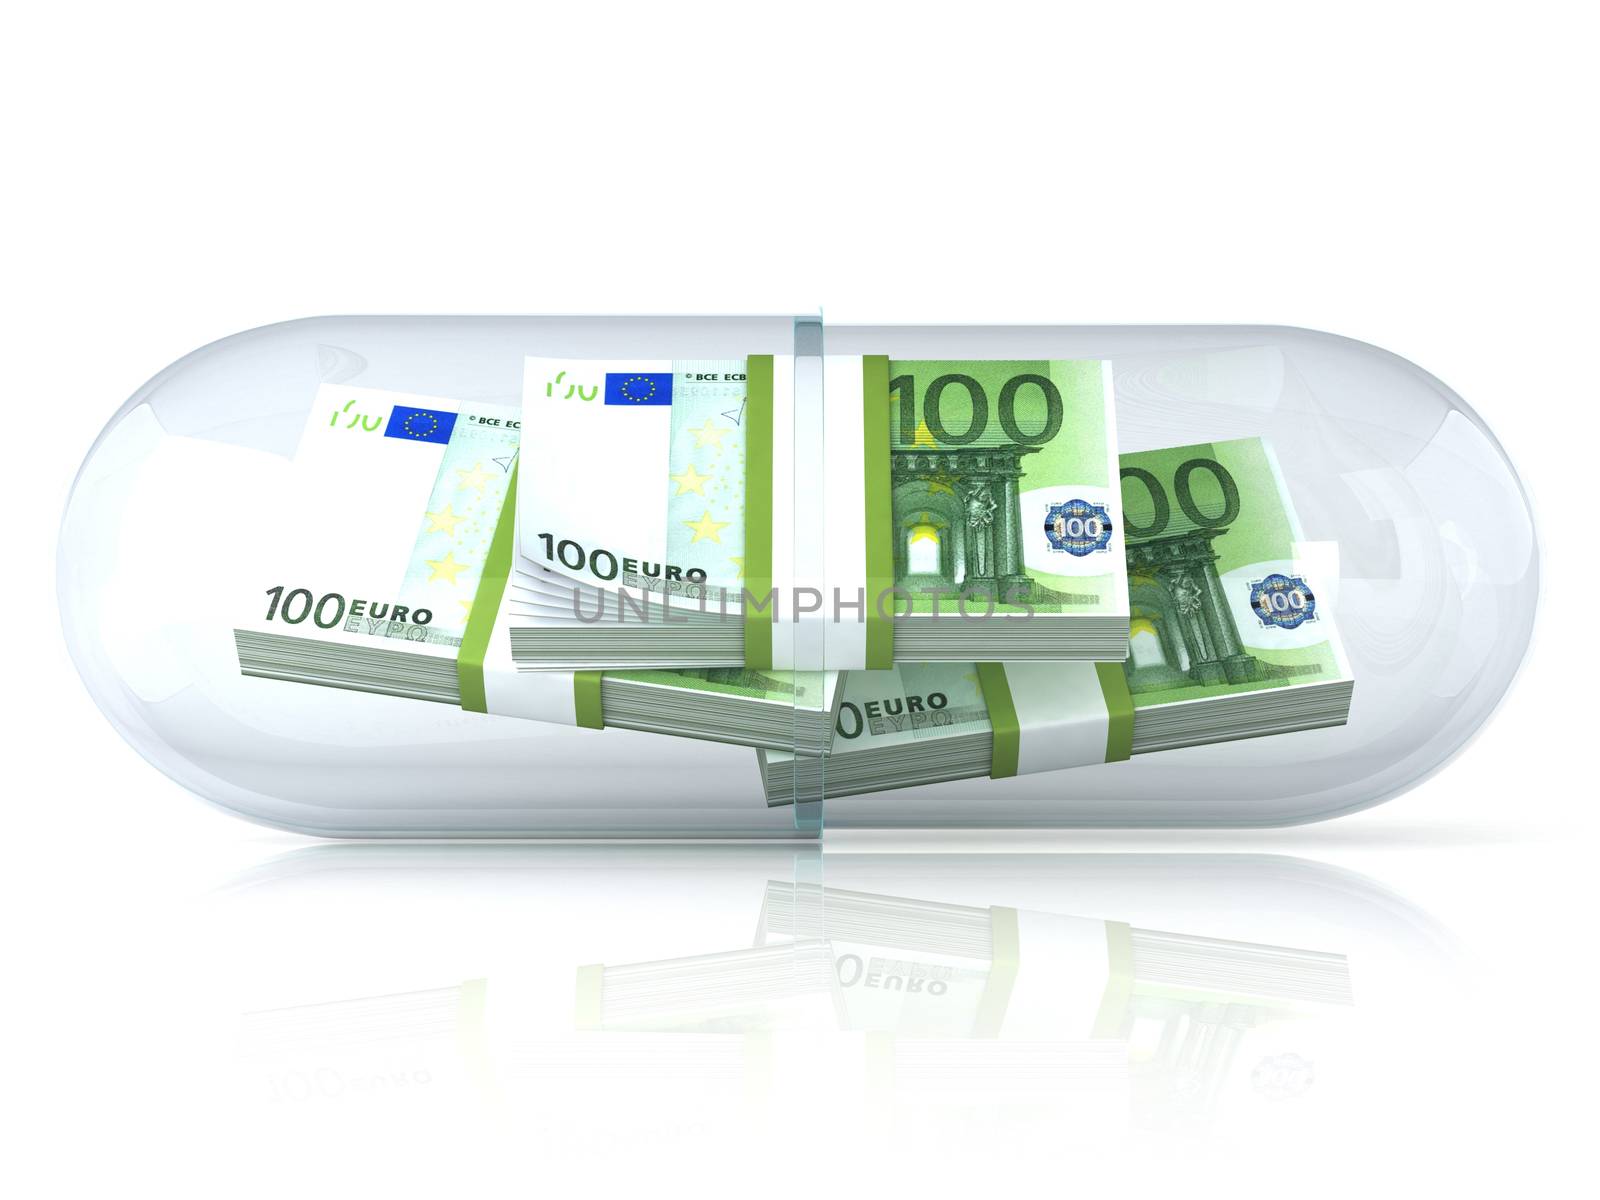 Transparent pill capsule, with euros stack inside. Isolated on white background. 3D render illustration